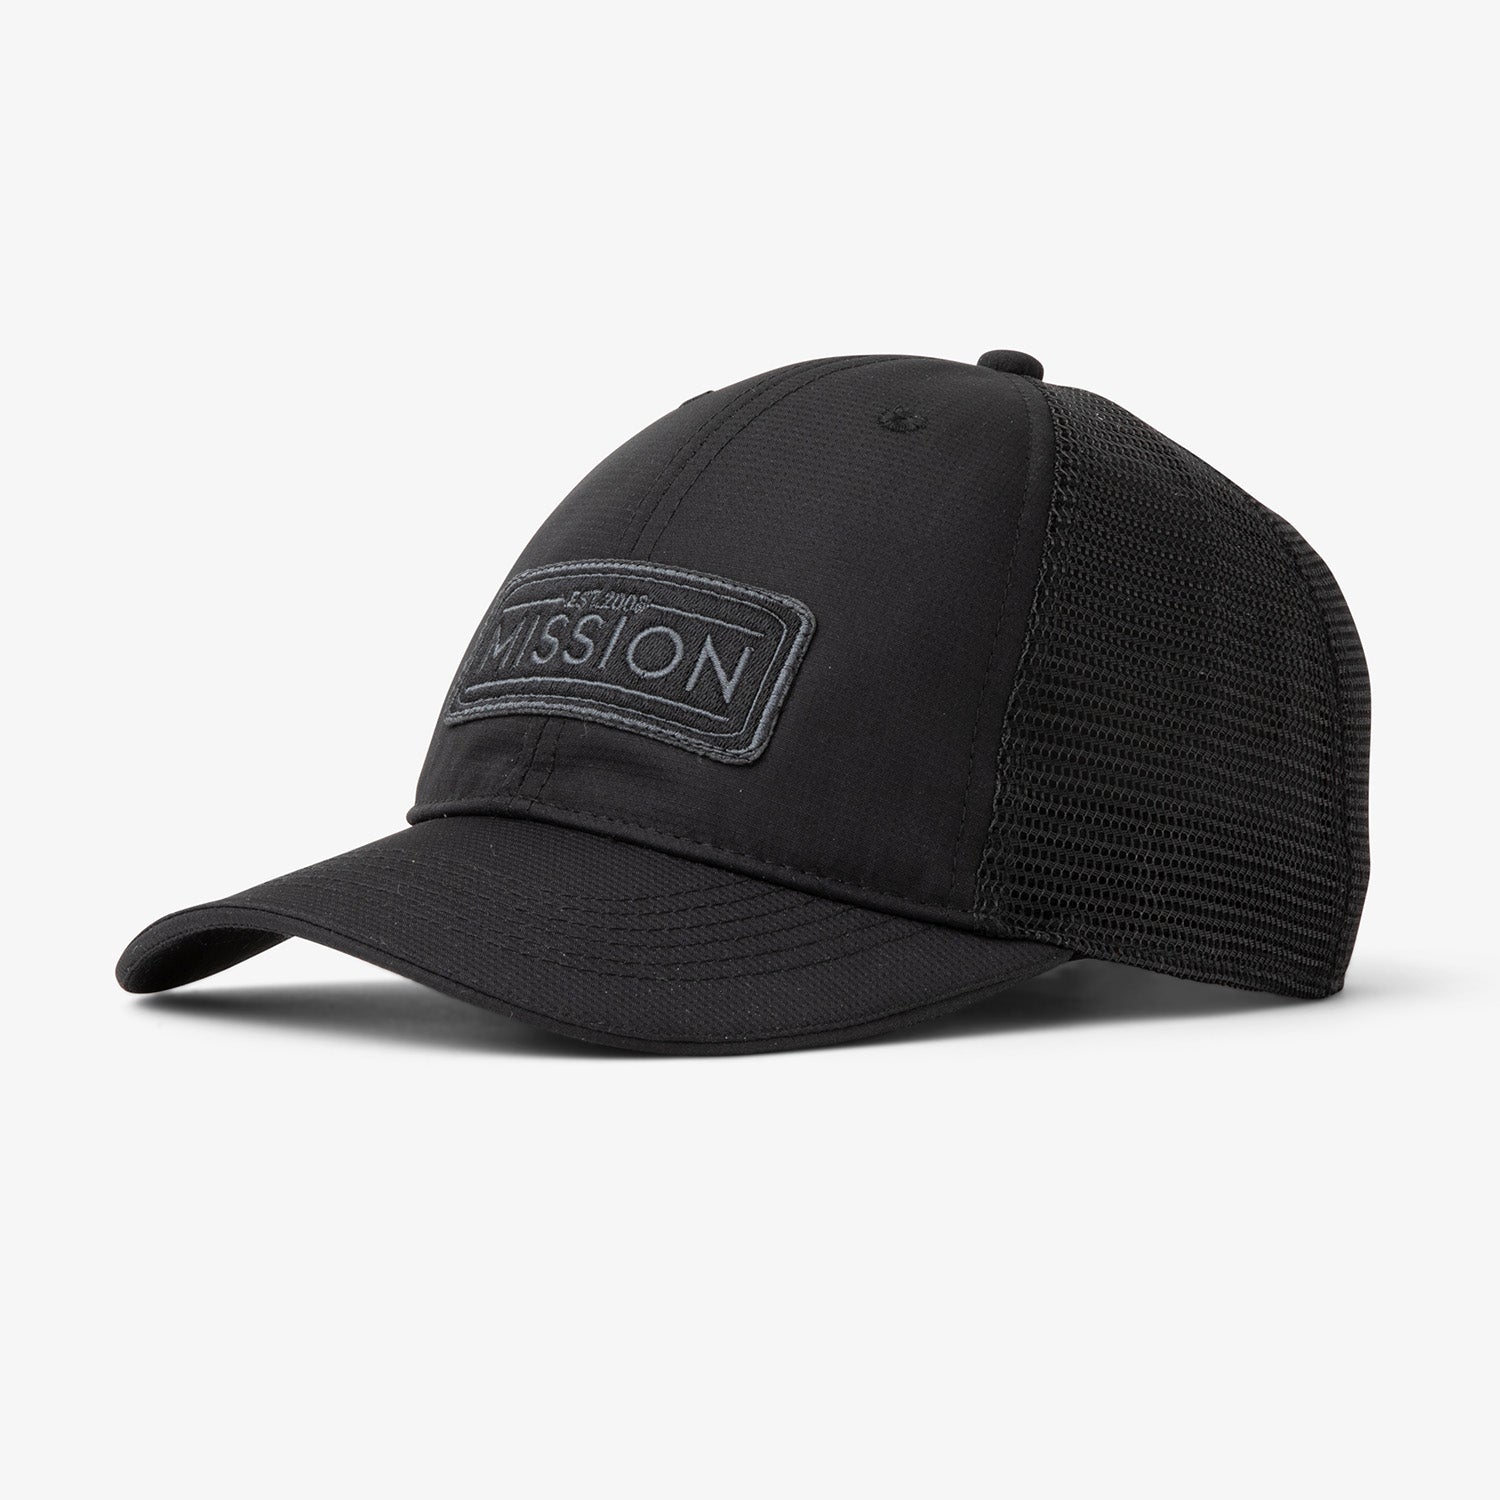 Cooling Westchester Hat Caps MISSION One Size Blackout 